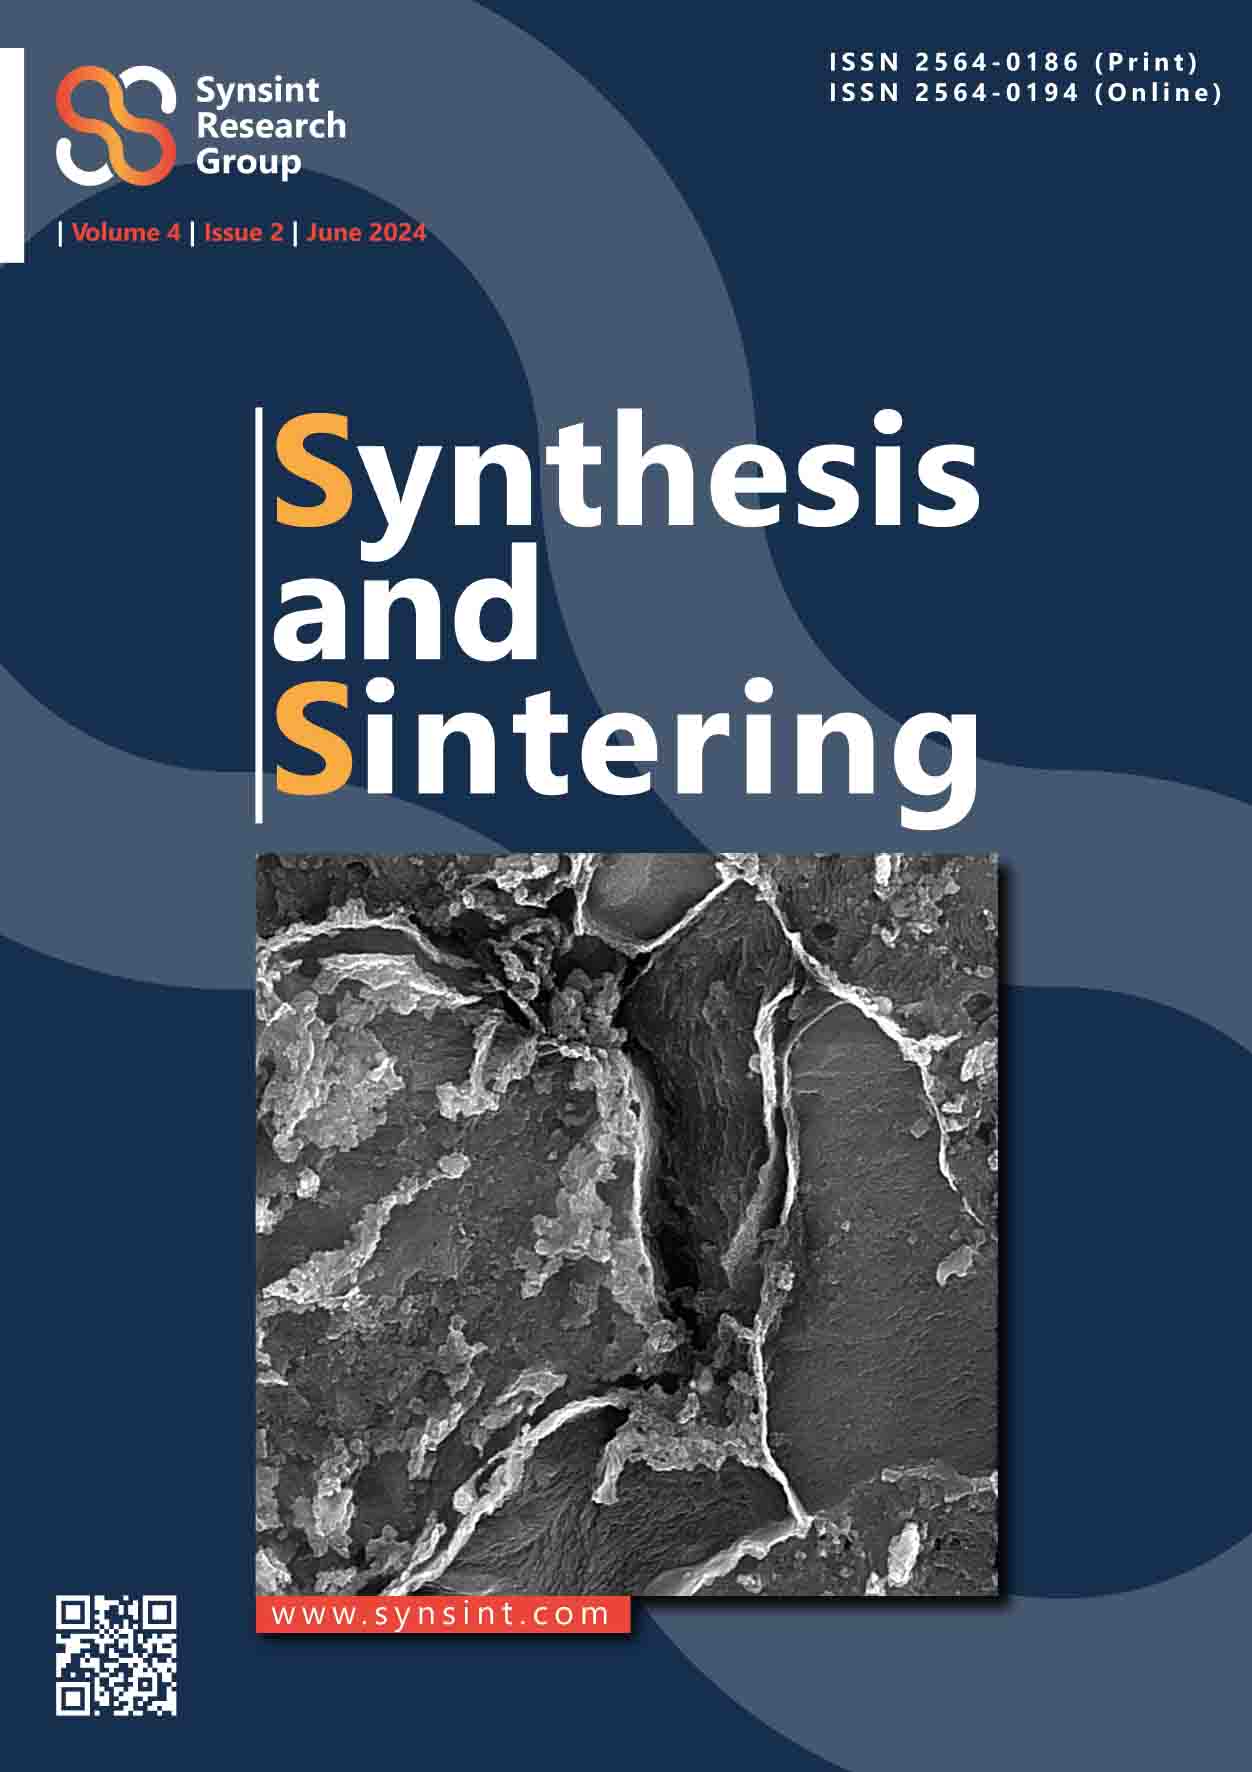 Synthesis and Sintering Vol. 4 No. 2 (2024)